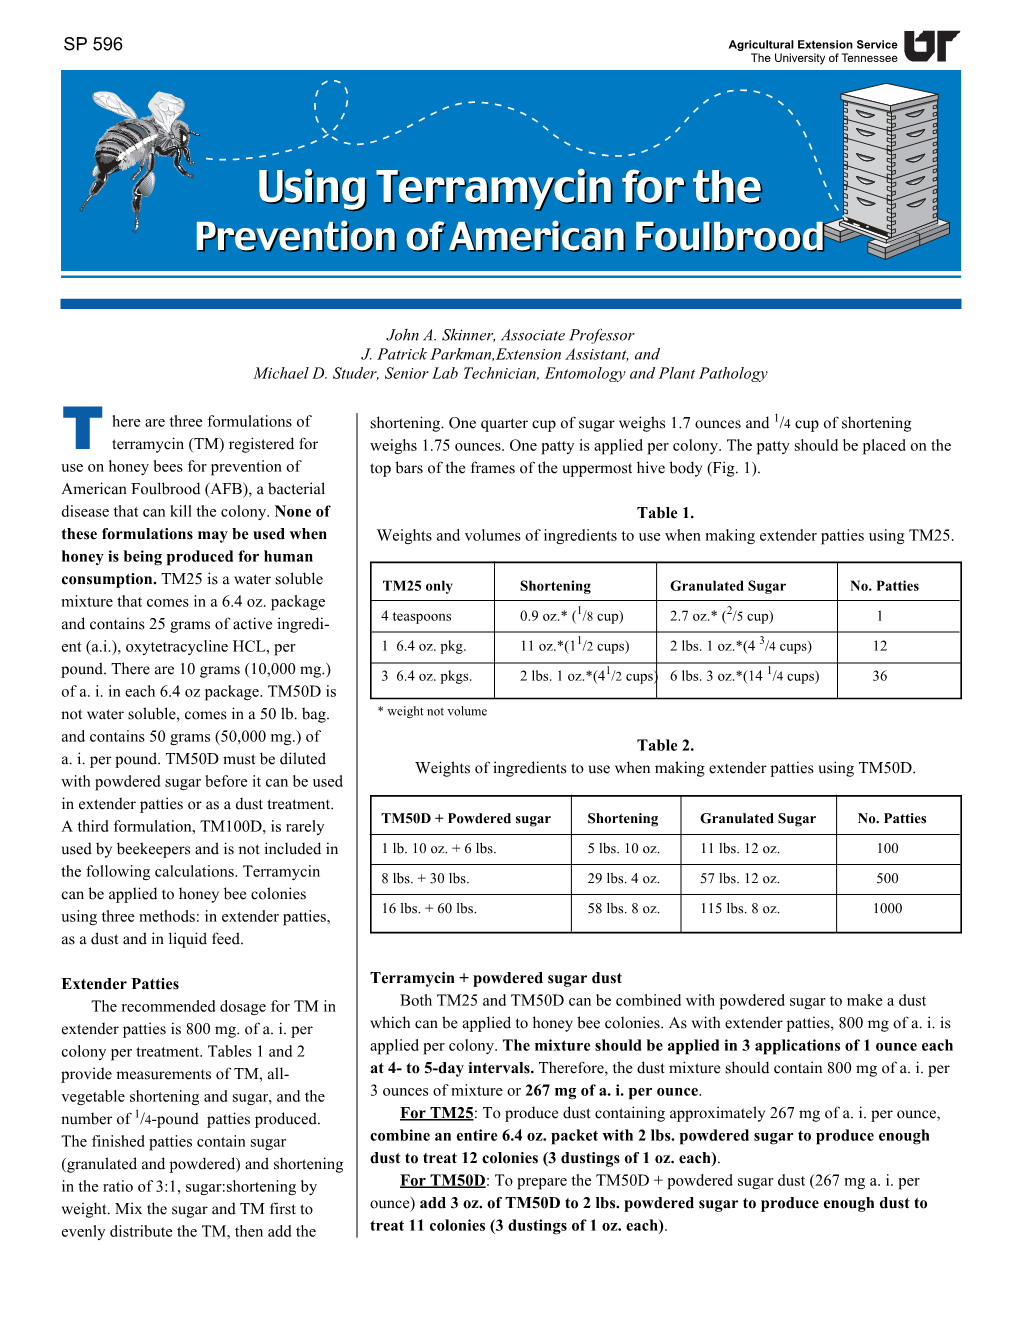 Using Terramycin for the Prevention of American Foulbrood